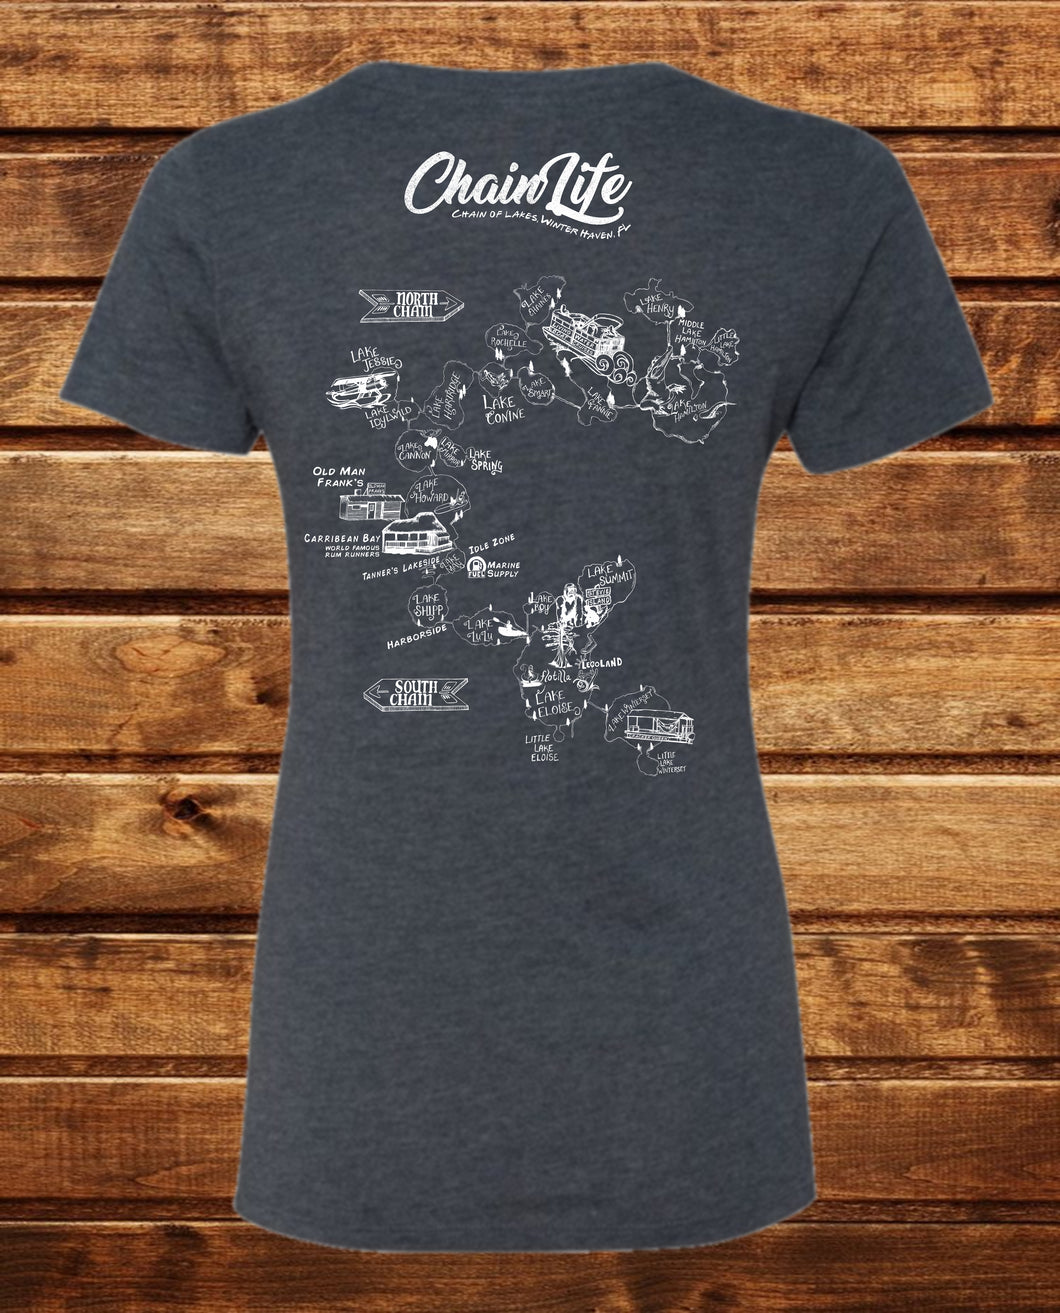 Chain of Lakes Ladies V-neck T-Shirt hand drawn by our local artist Brooke-Braddy Moore 7 colors